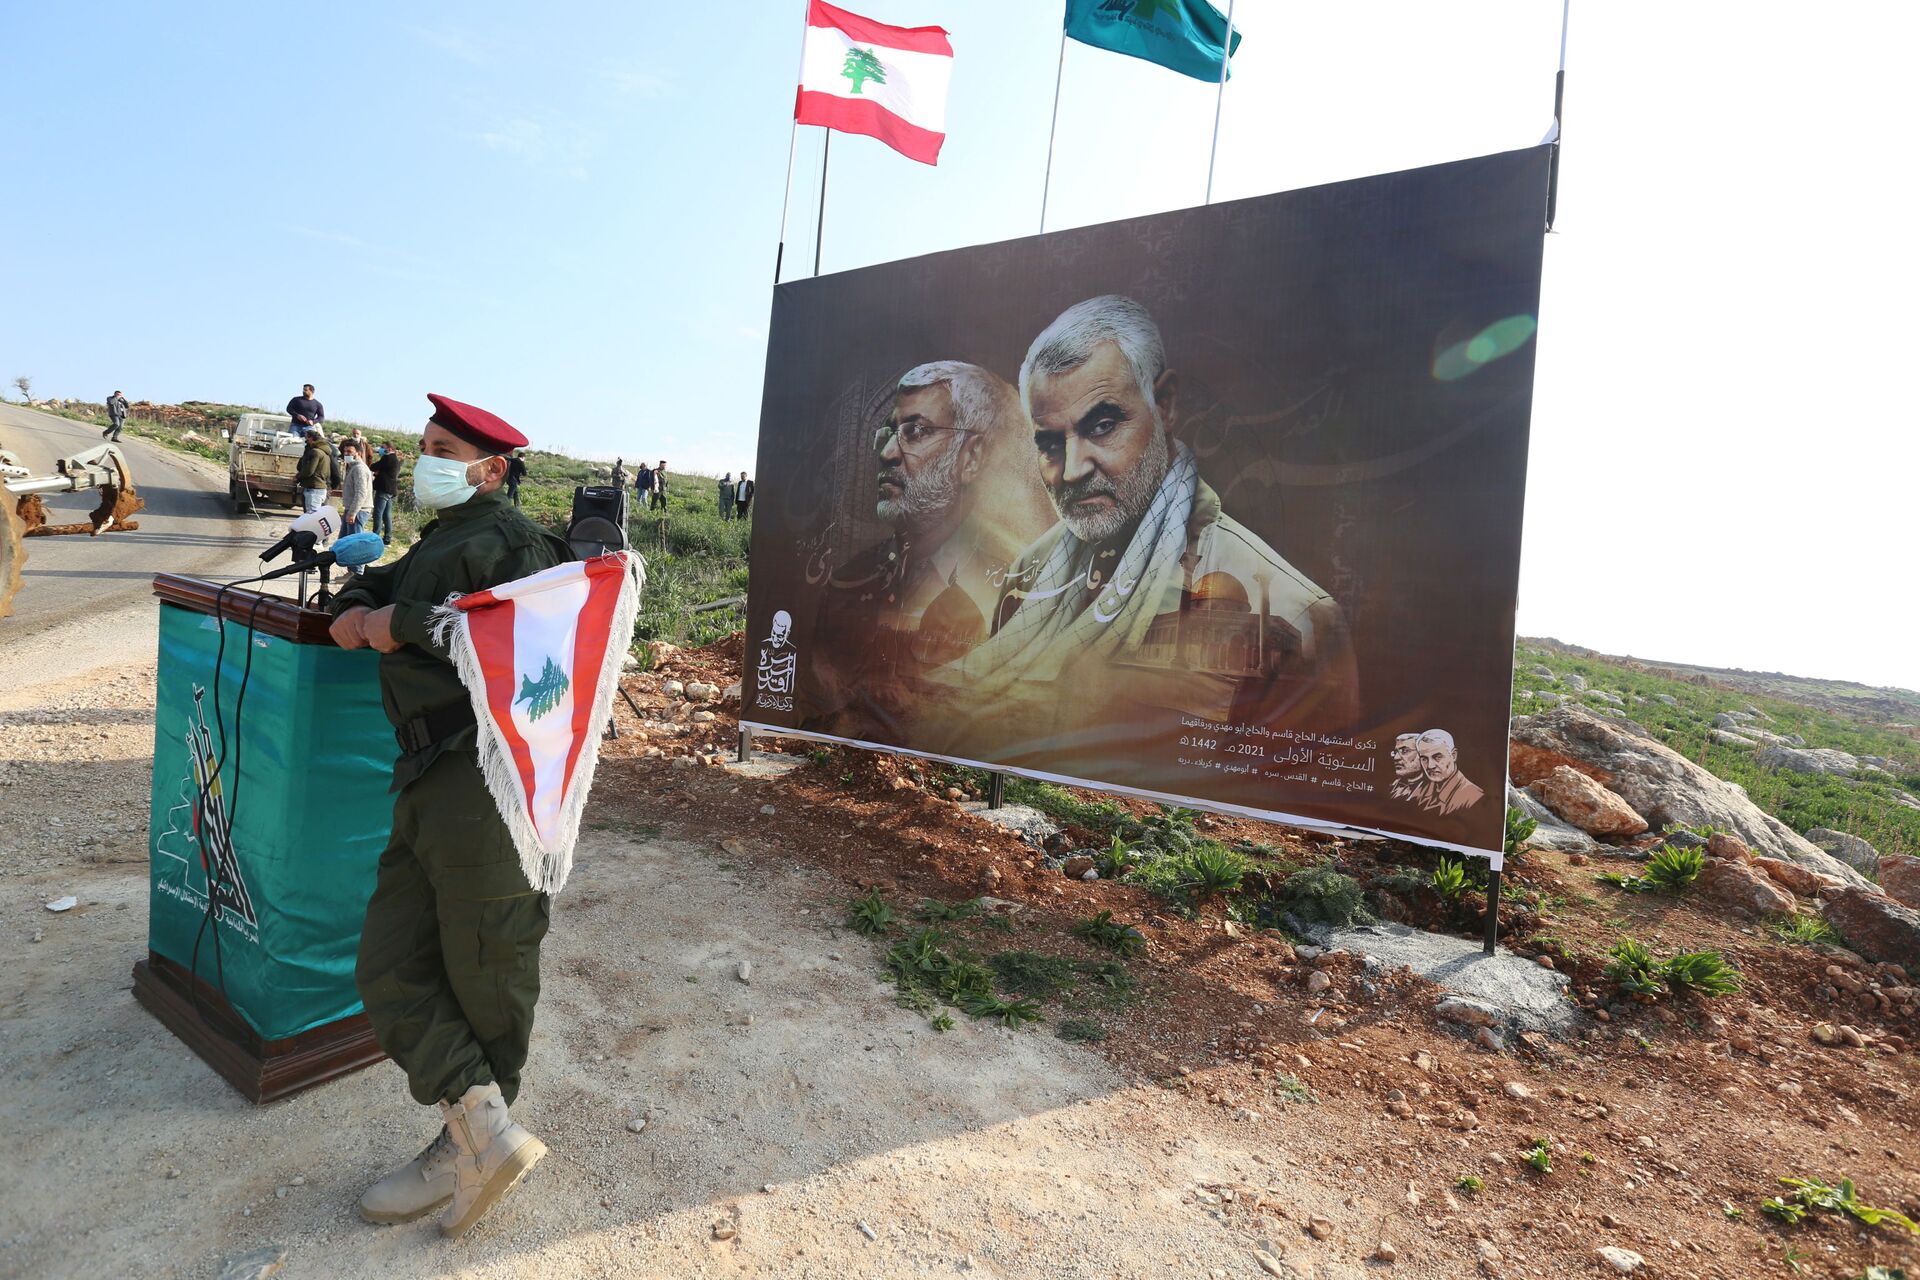 A member of Lebanon's Hezbollah holds a Lebanese flag as he stands in front of a picture depicting senior Iranian military commander General Qassem Soleimani and Iraqi militia commander Abu Mahdi al-Muhandis who were killed in a U.S. attack, during a ceremony marking the first anniversary of their killing, in the southern village of Khiam, Lebanon January 3, 2021. REUTERS/Aziz Taher - Sputnik International, 1920, 07.09.2021